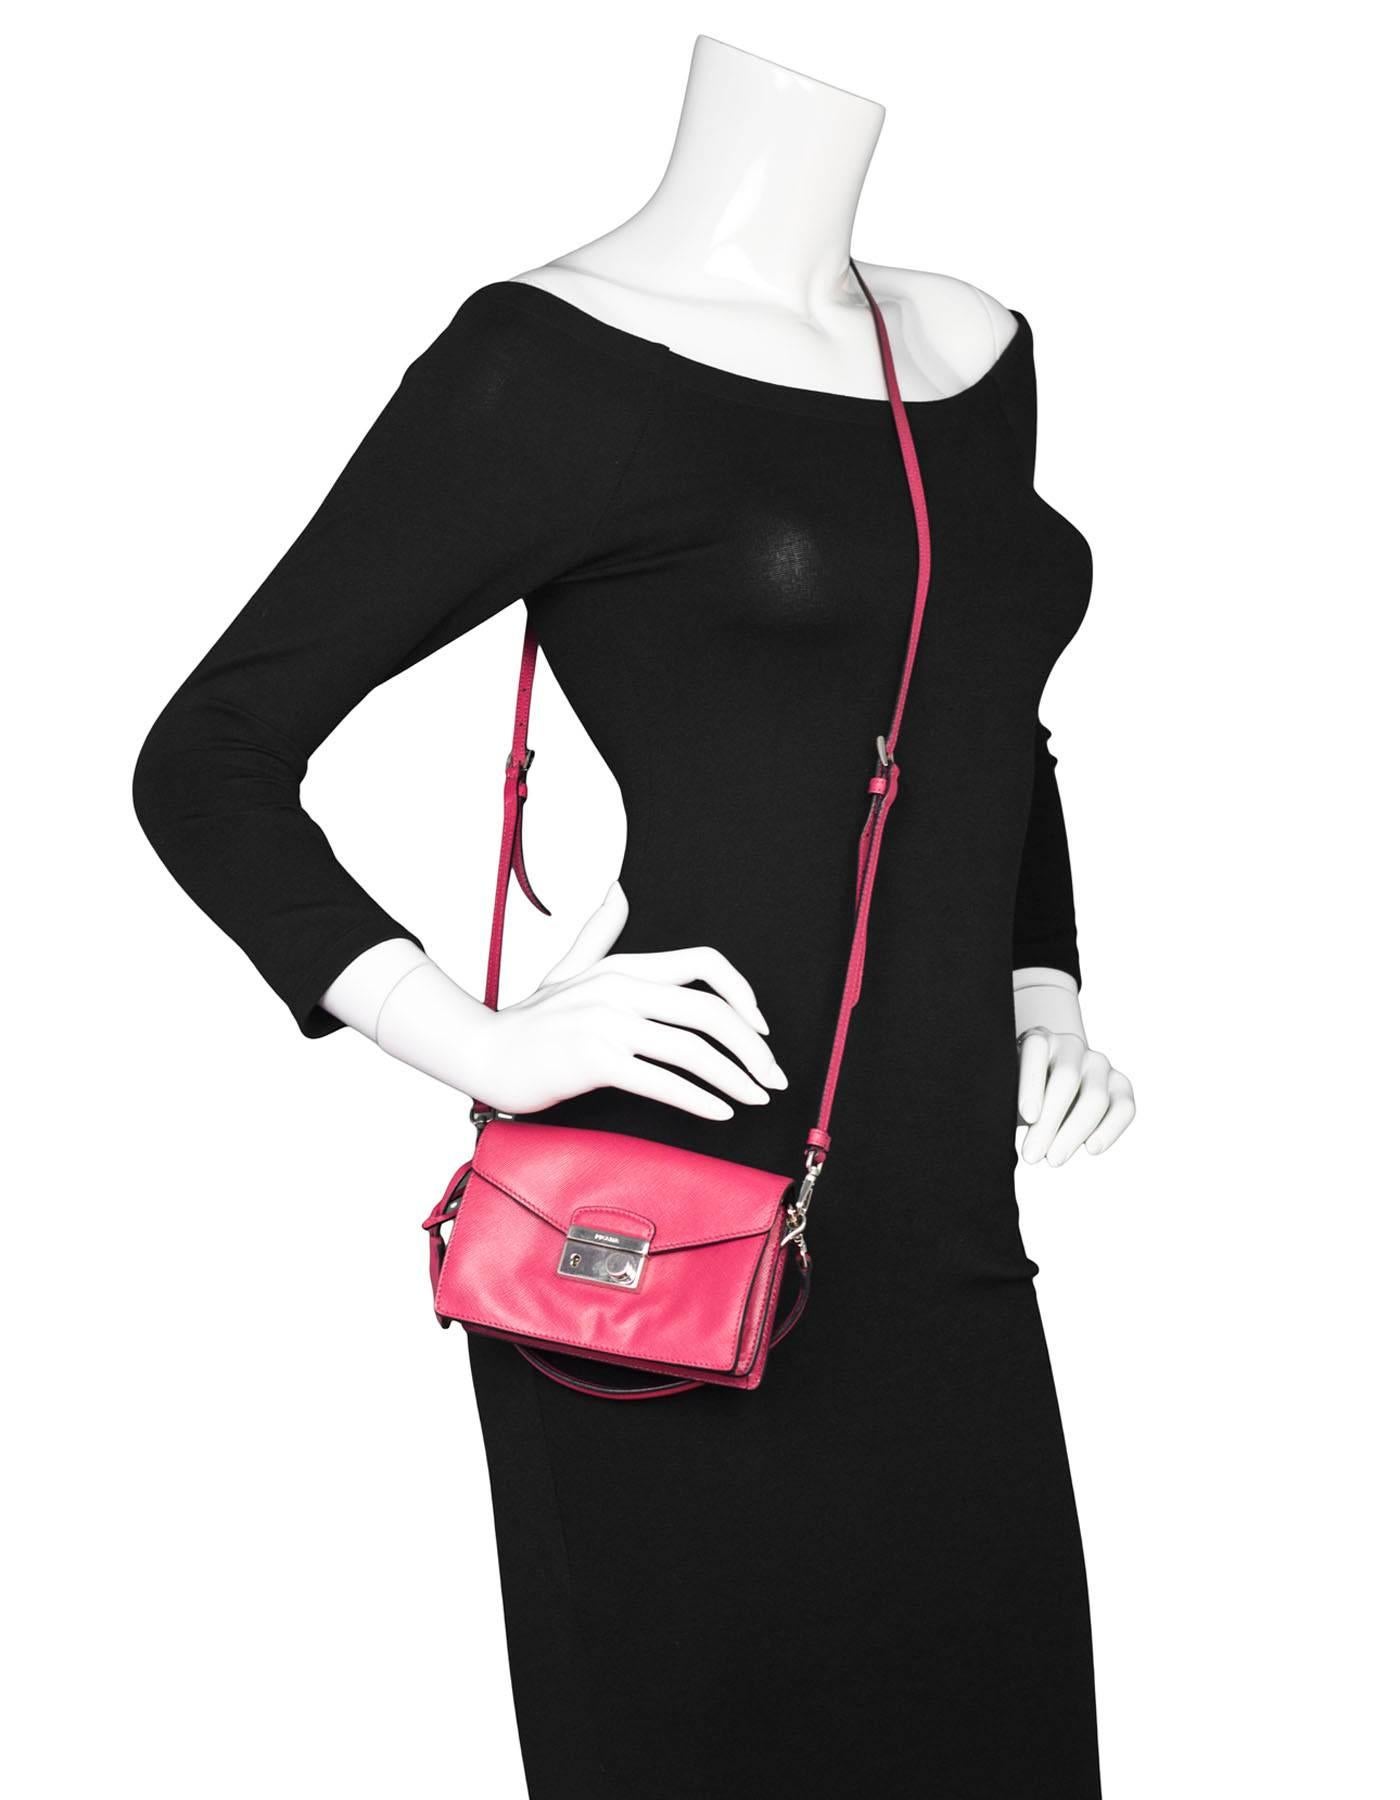 Prada Salmon Pink Saffiano Mini Sound Crossbody Bag
Features interchangable crossbody strap or handle strap

Made In: Italy
Color: Salmon pink
Materials: Saffiano leather, metal
Lining: Black leather
Closure/Opening: Flap top with push lock
Exterior